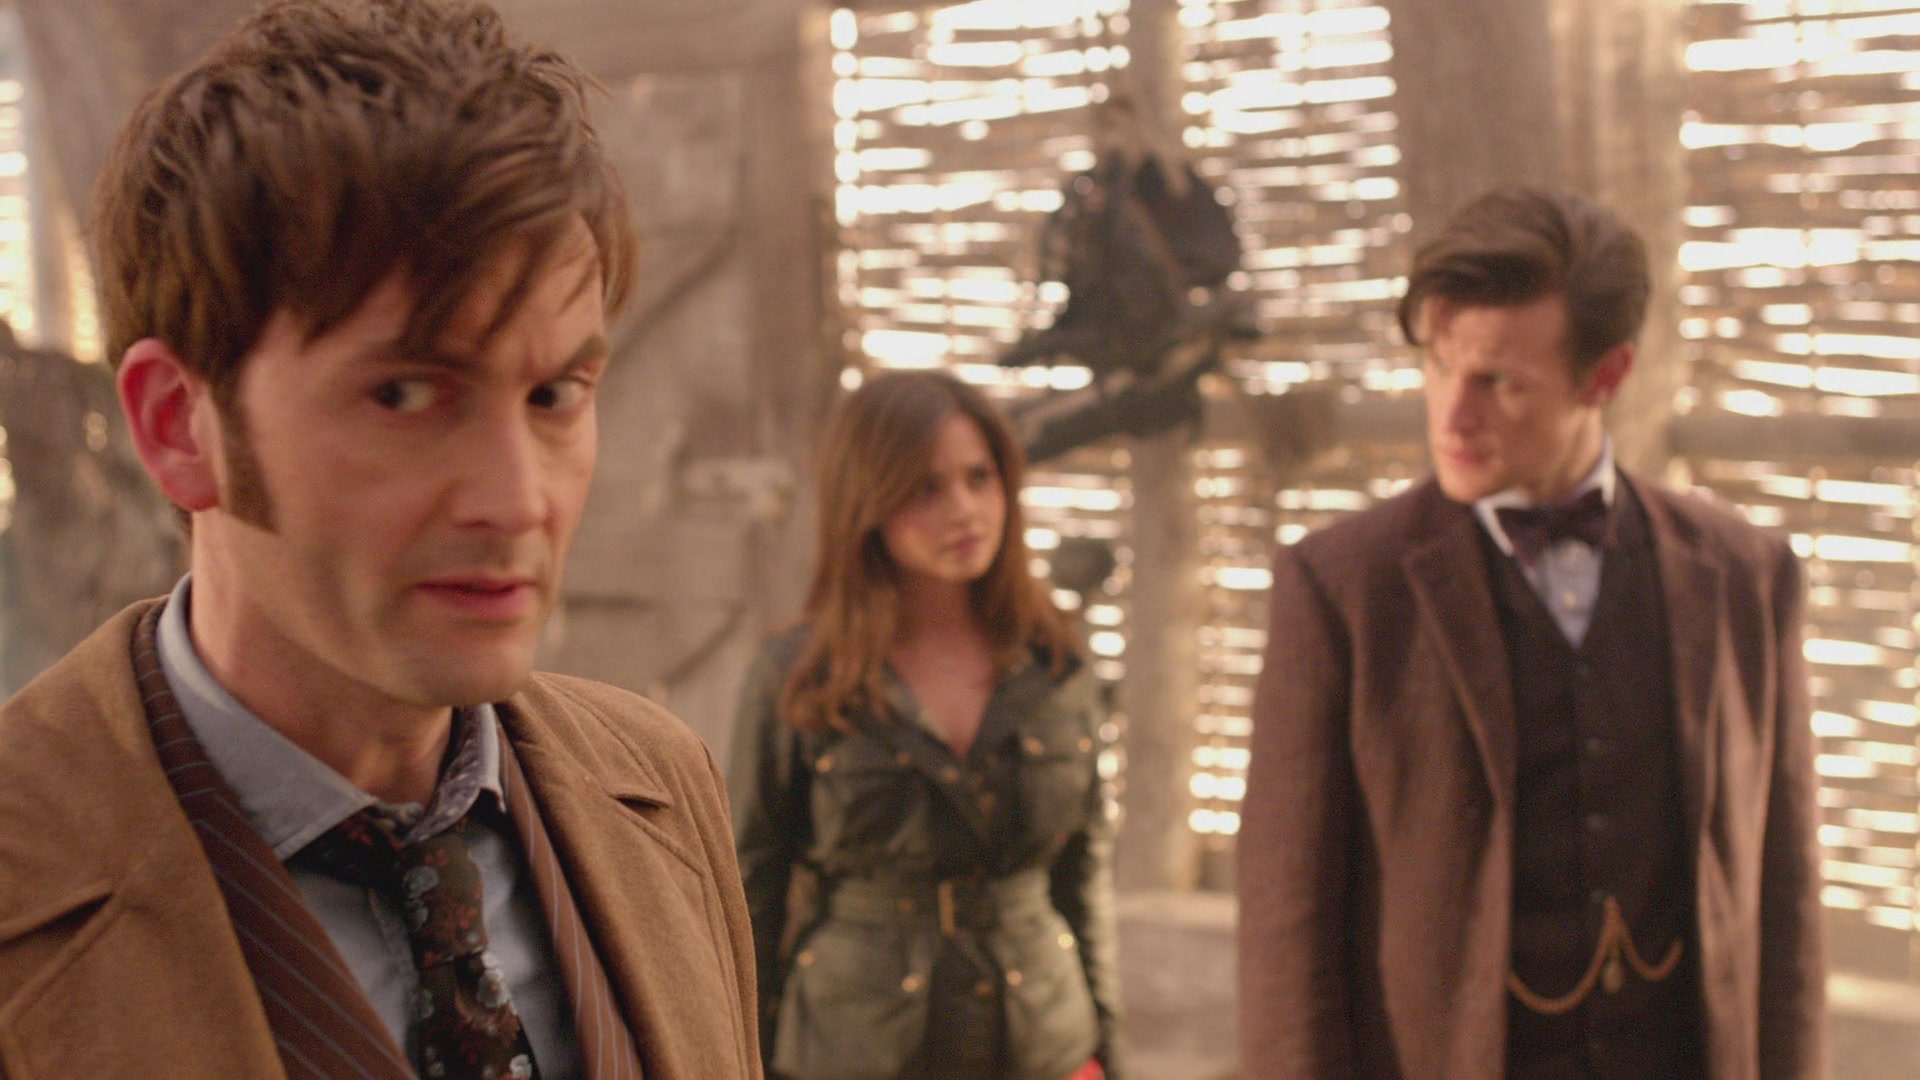 DayOfTheDoctor-Caps-1076.jpg